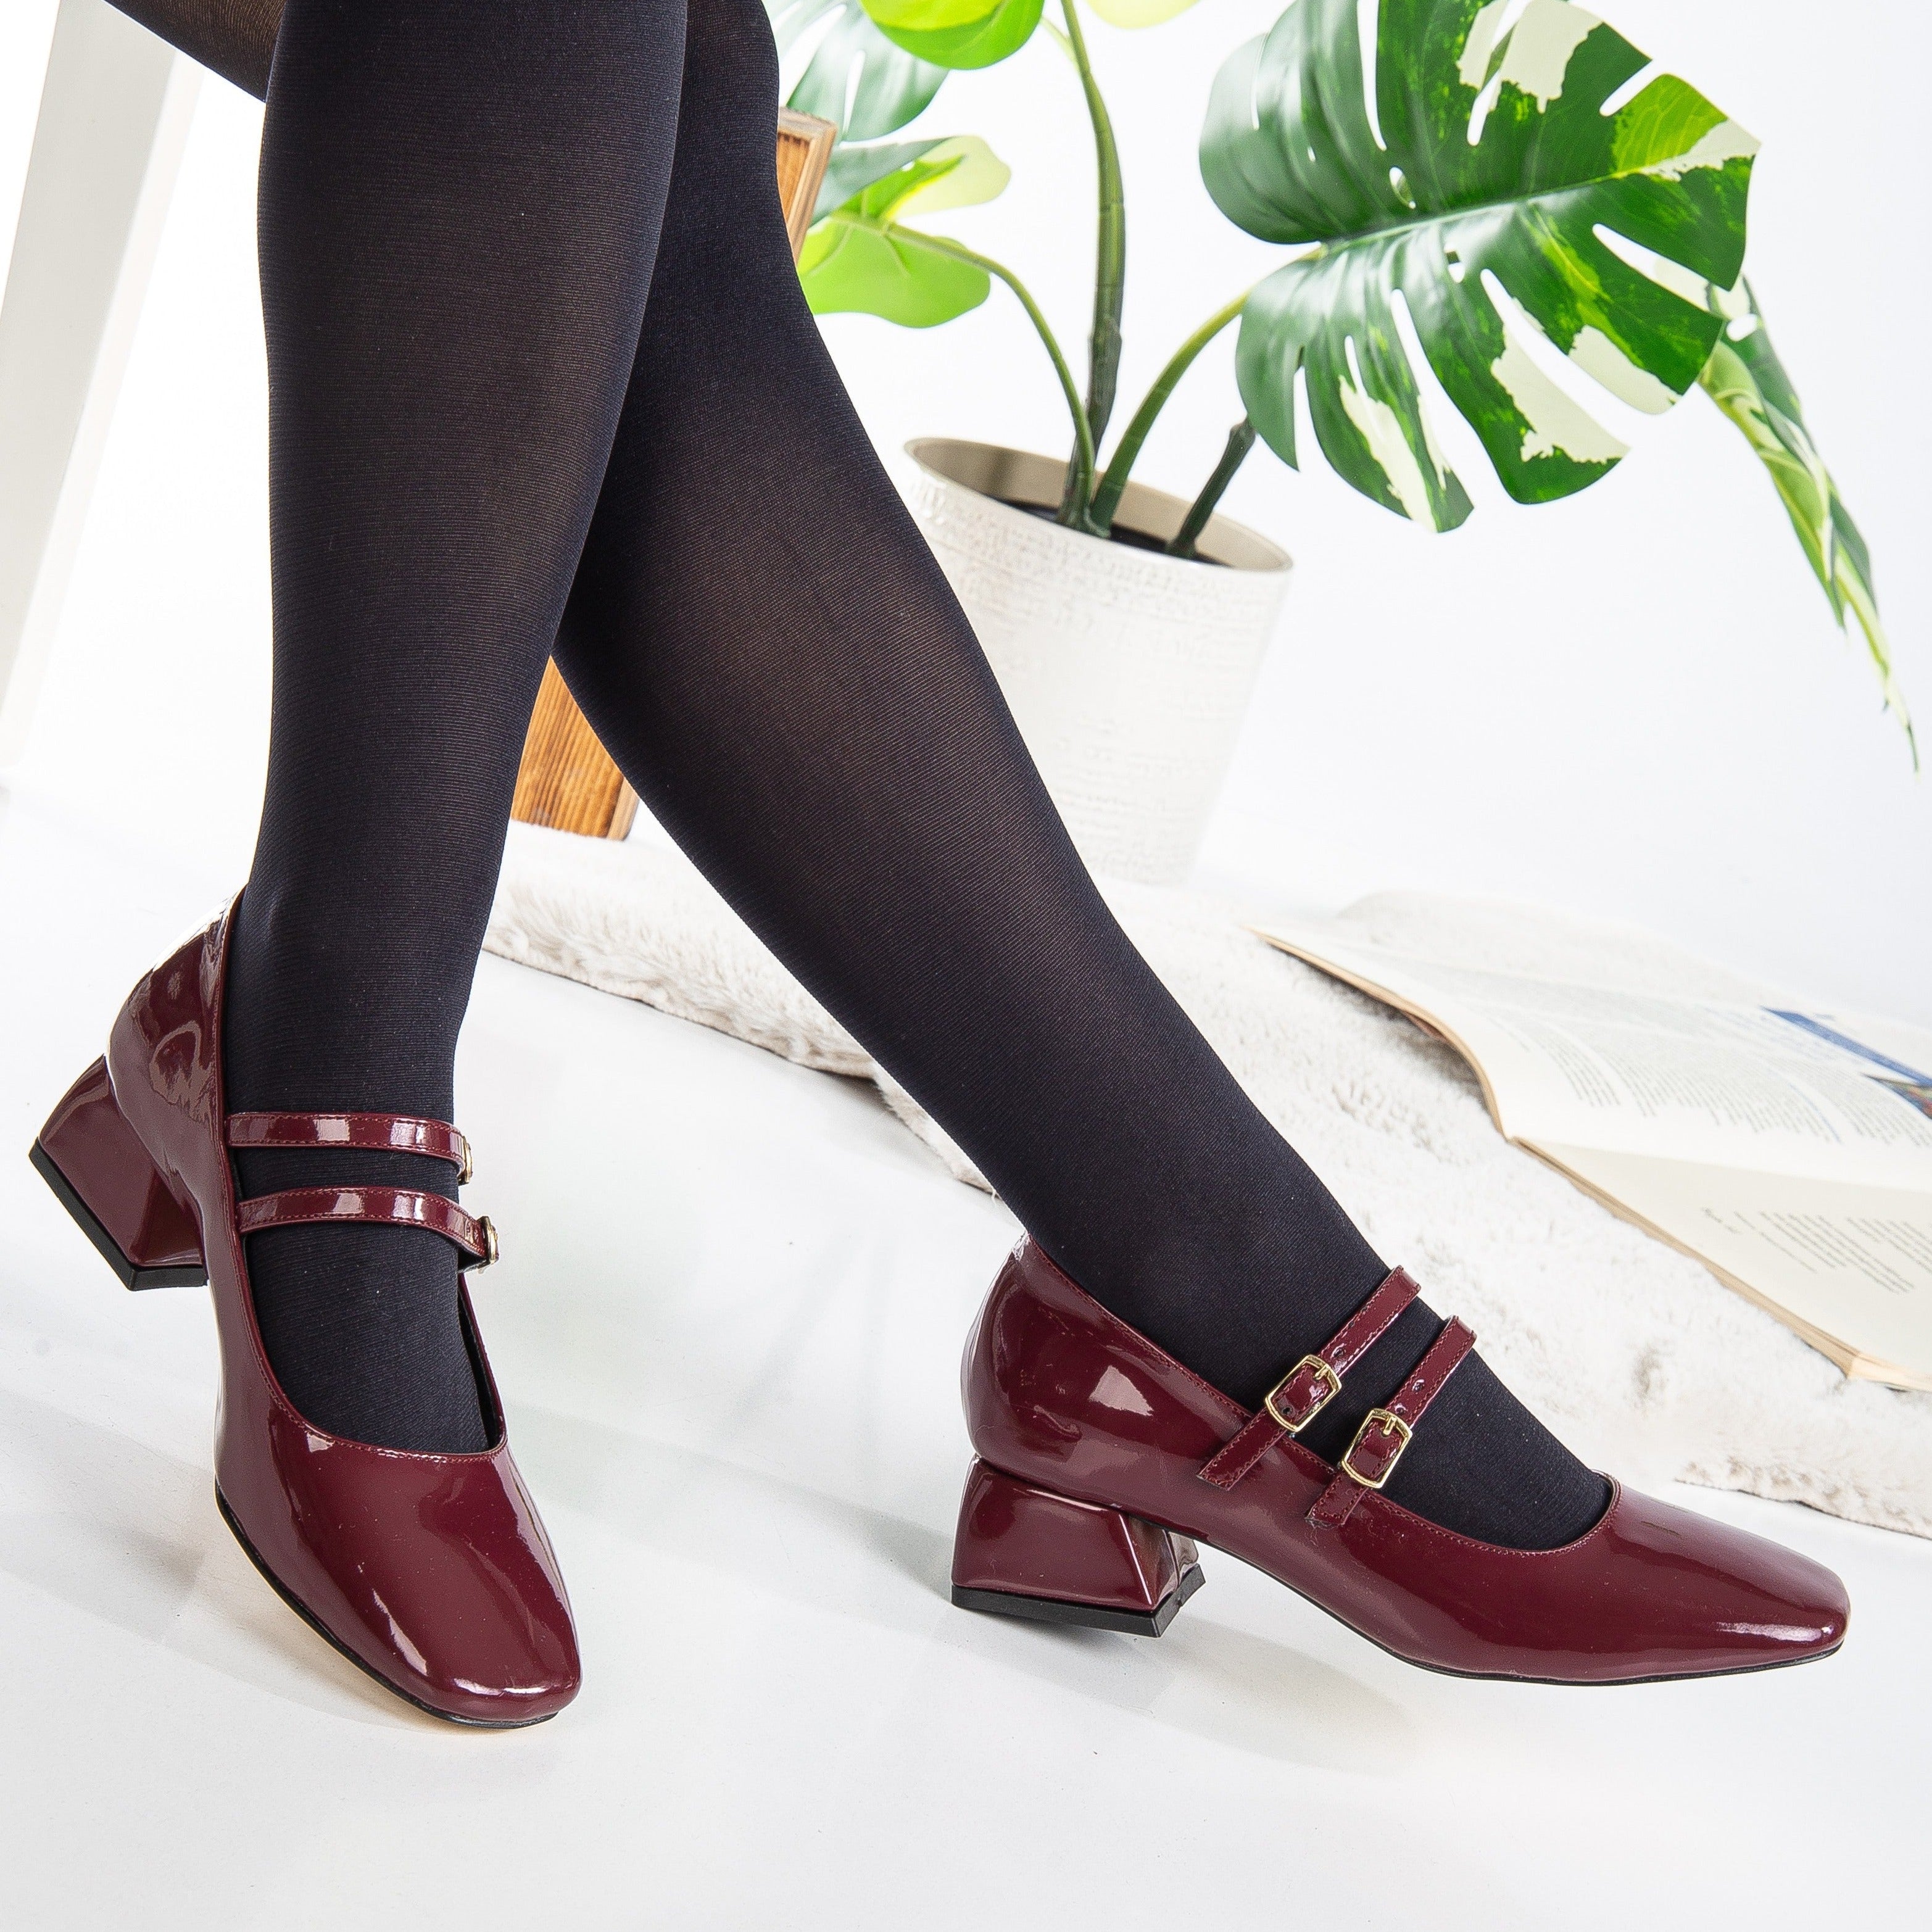 Lizbeth - Red Cherry Mary Jane Shoes